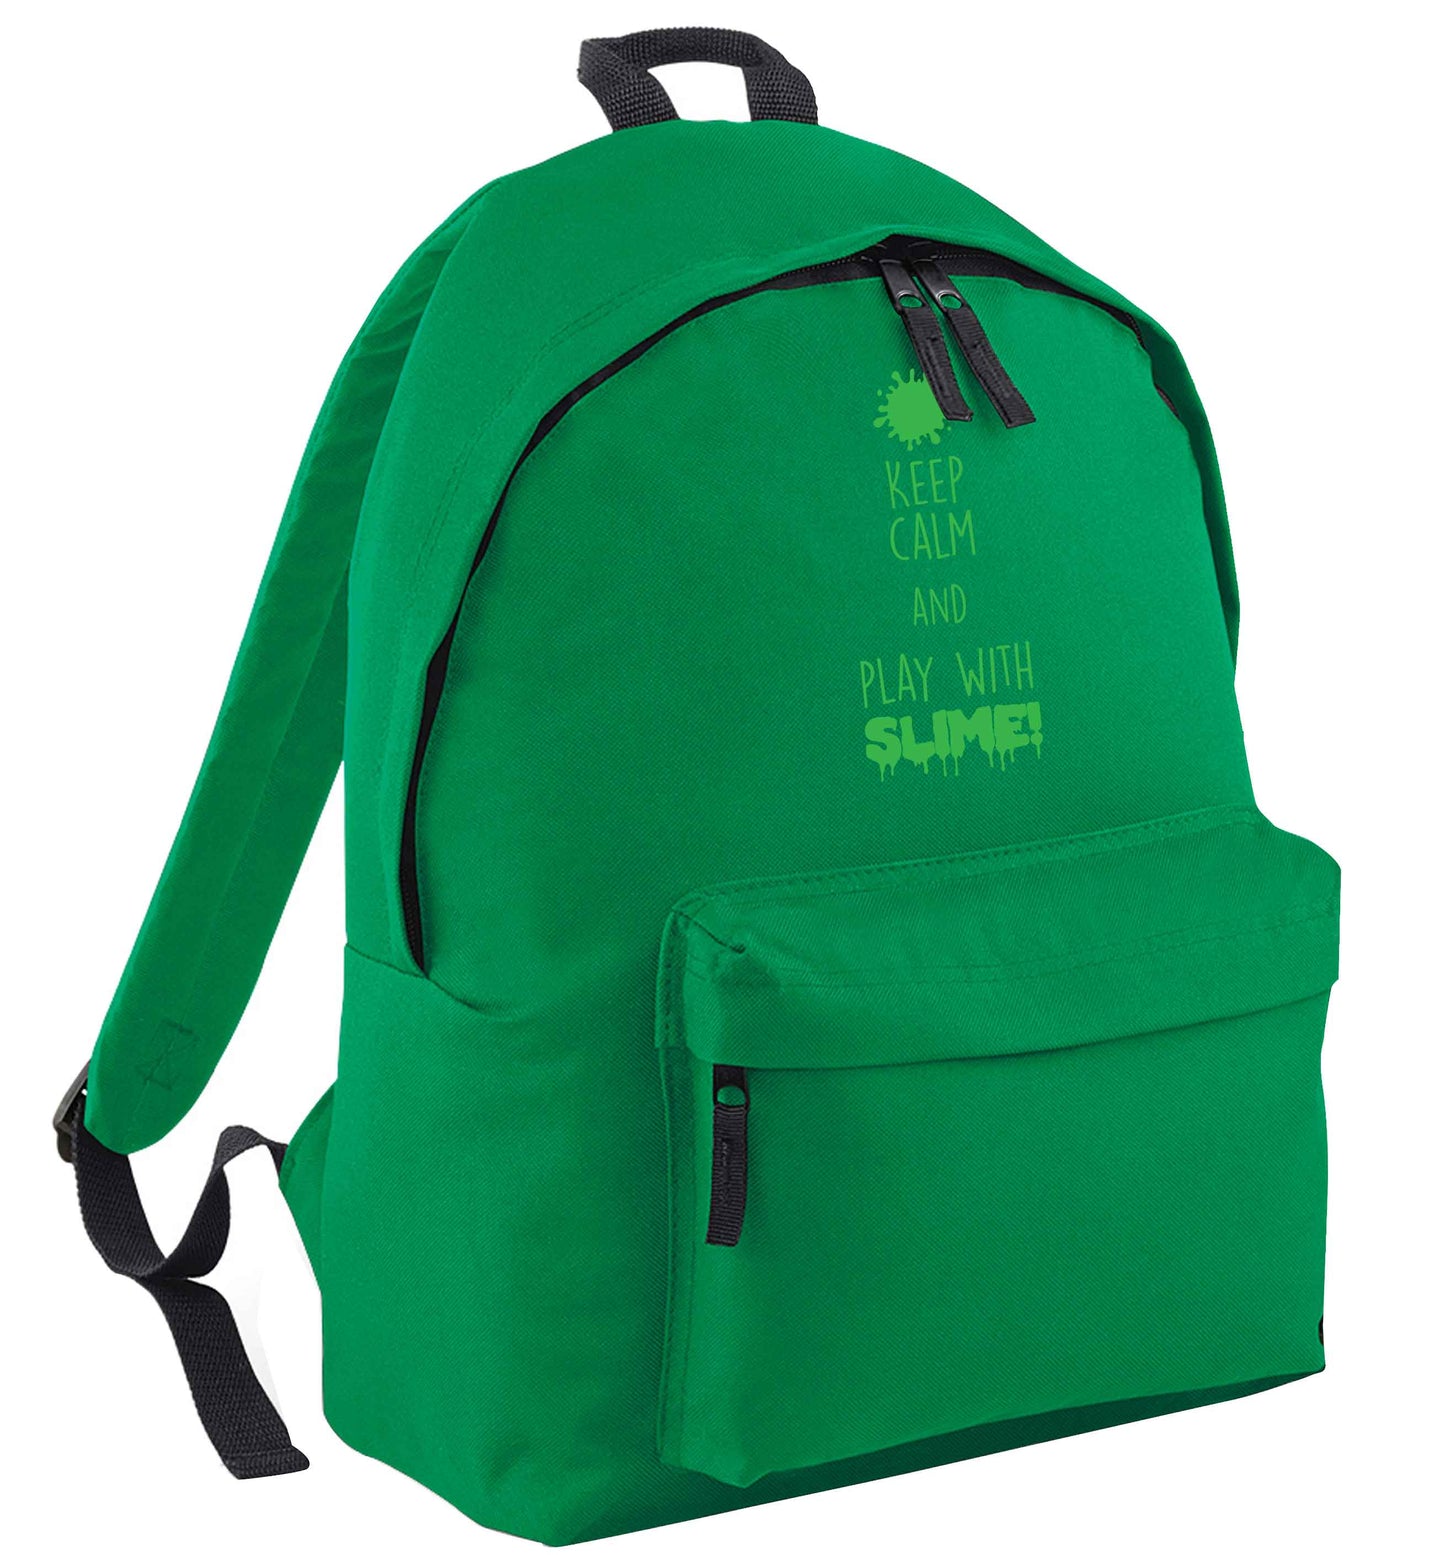 Neon green keep calm and play with slime!green adults backpack